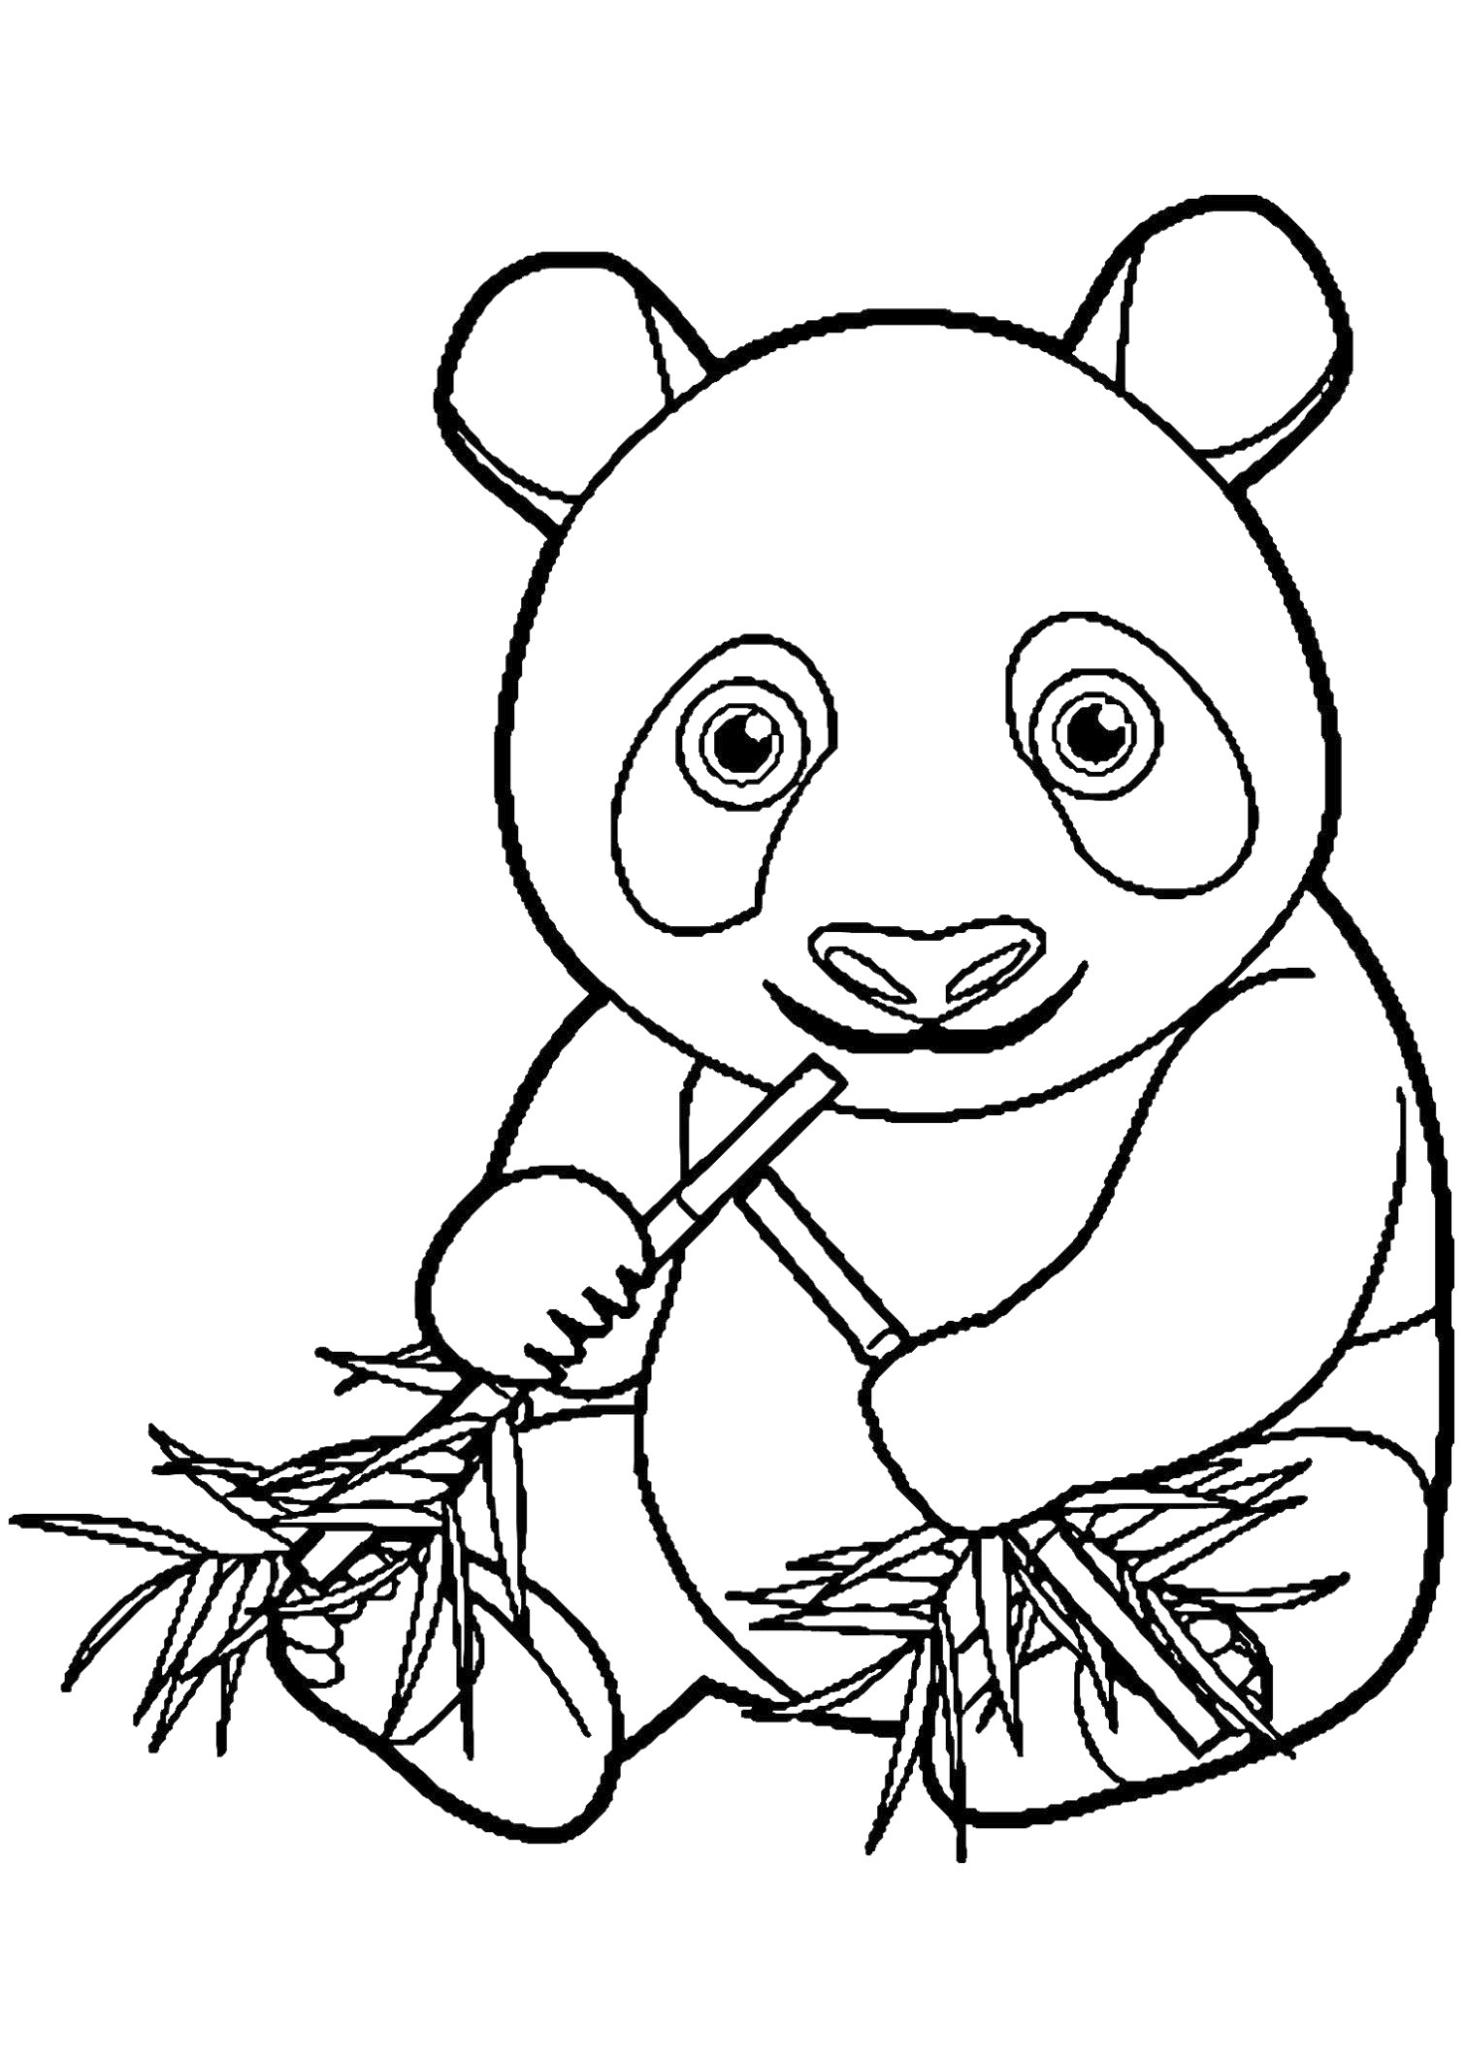 panda-coloring-page-for-adults-coloring-pages-printable-com-panda